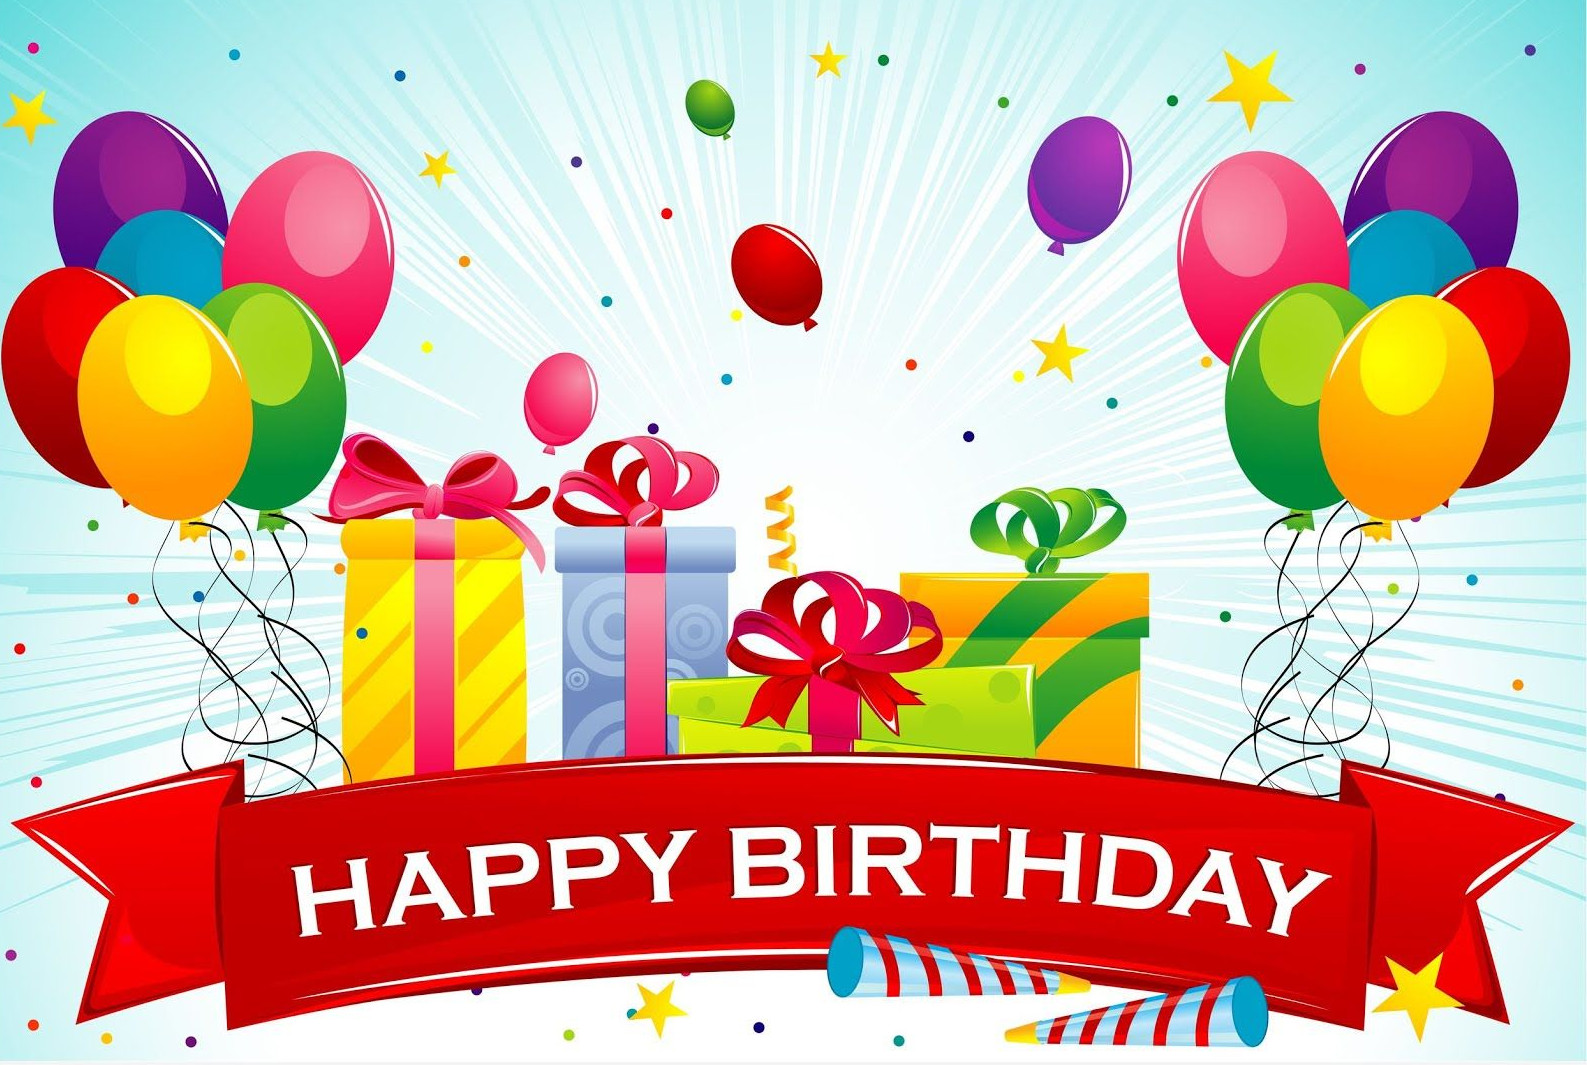 Free Birthday Cards For Facebook Wall
 35 Happy Birthday Cards Free To Download – The WoW Style